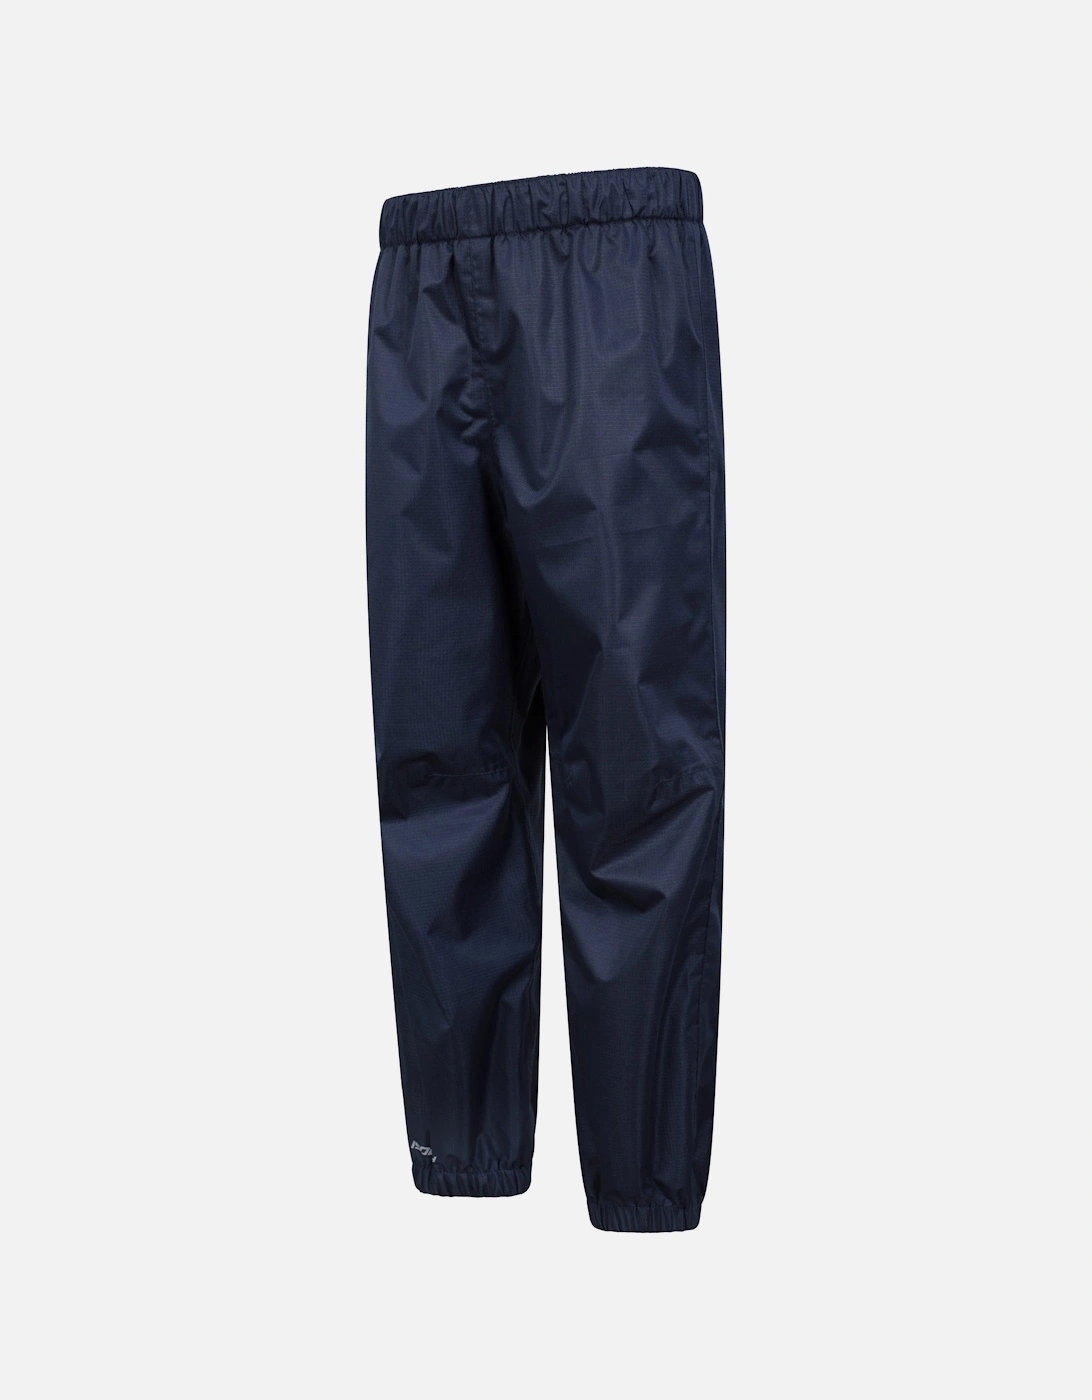 Childrens/Kids Gale Waterproof Over Trousers